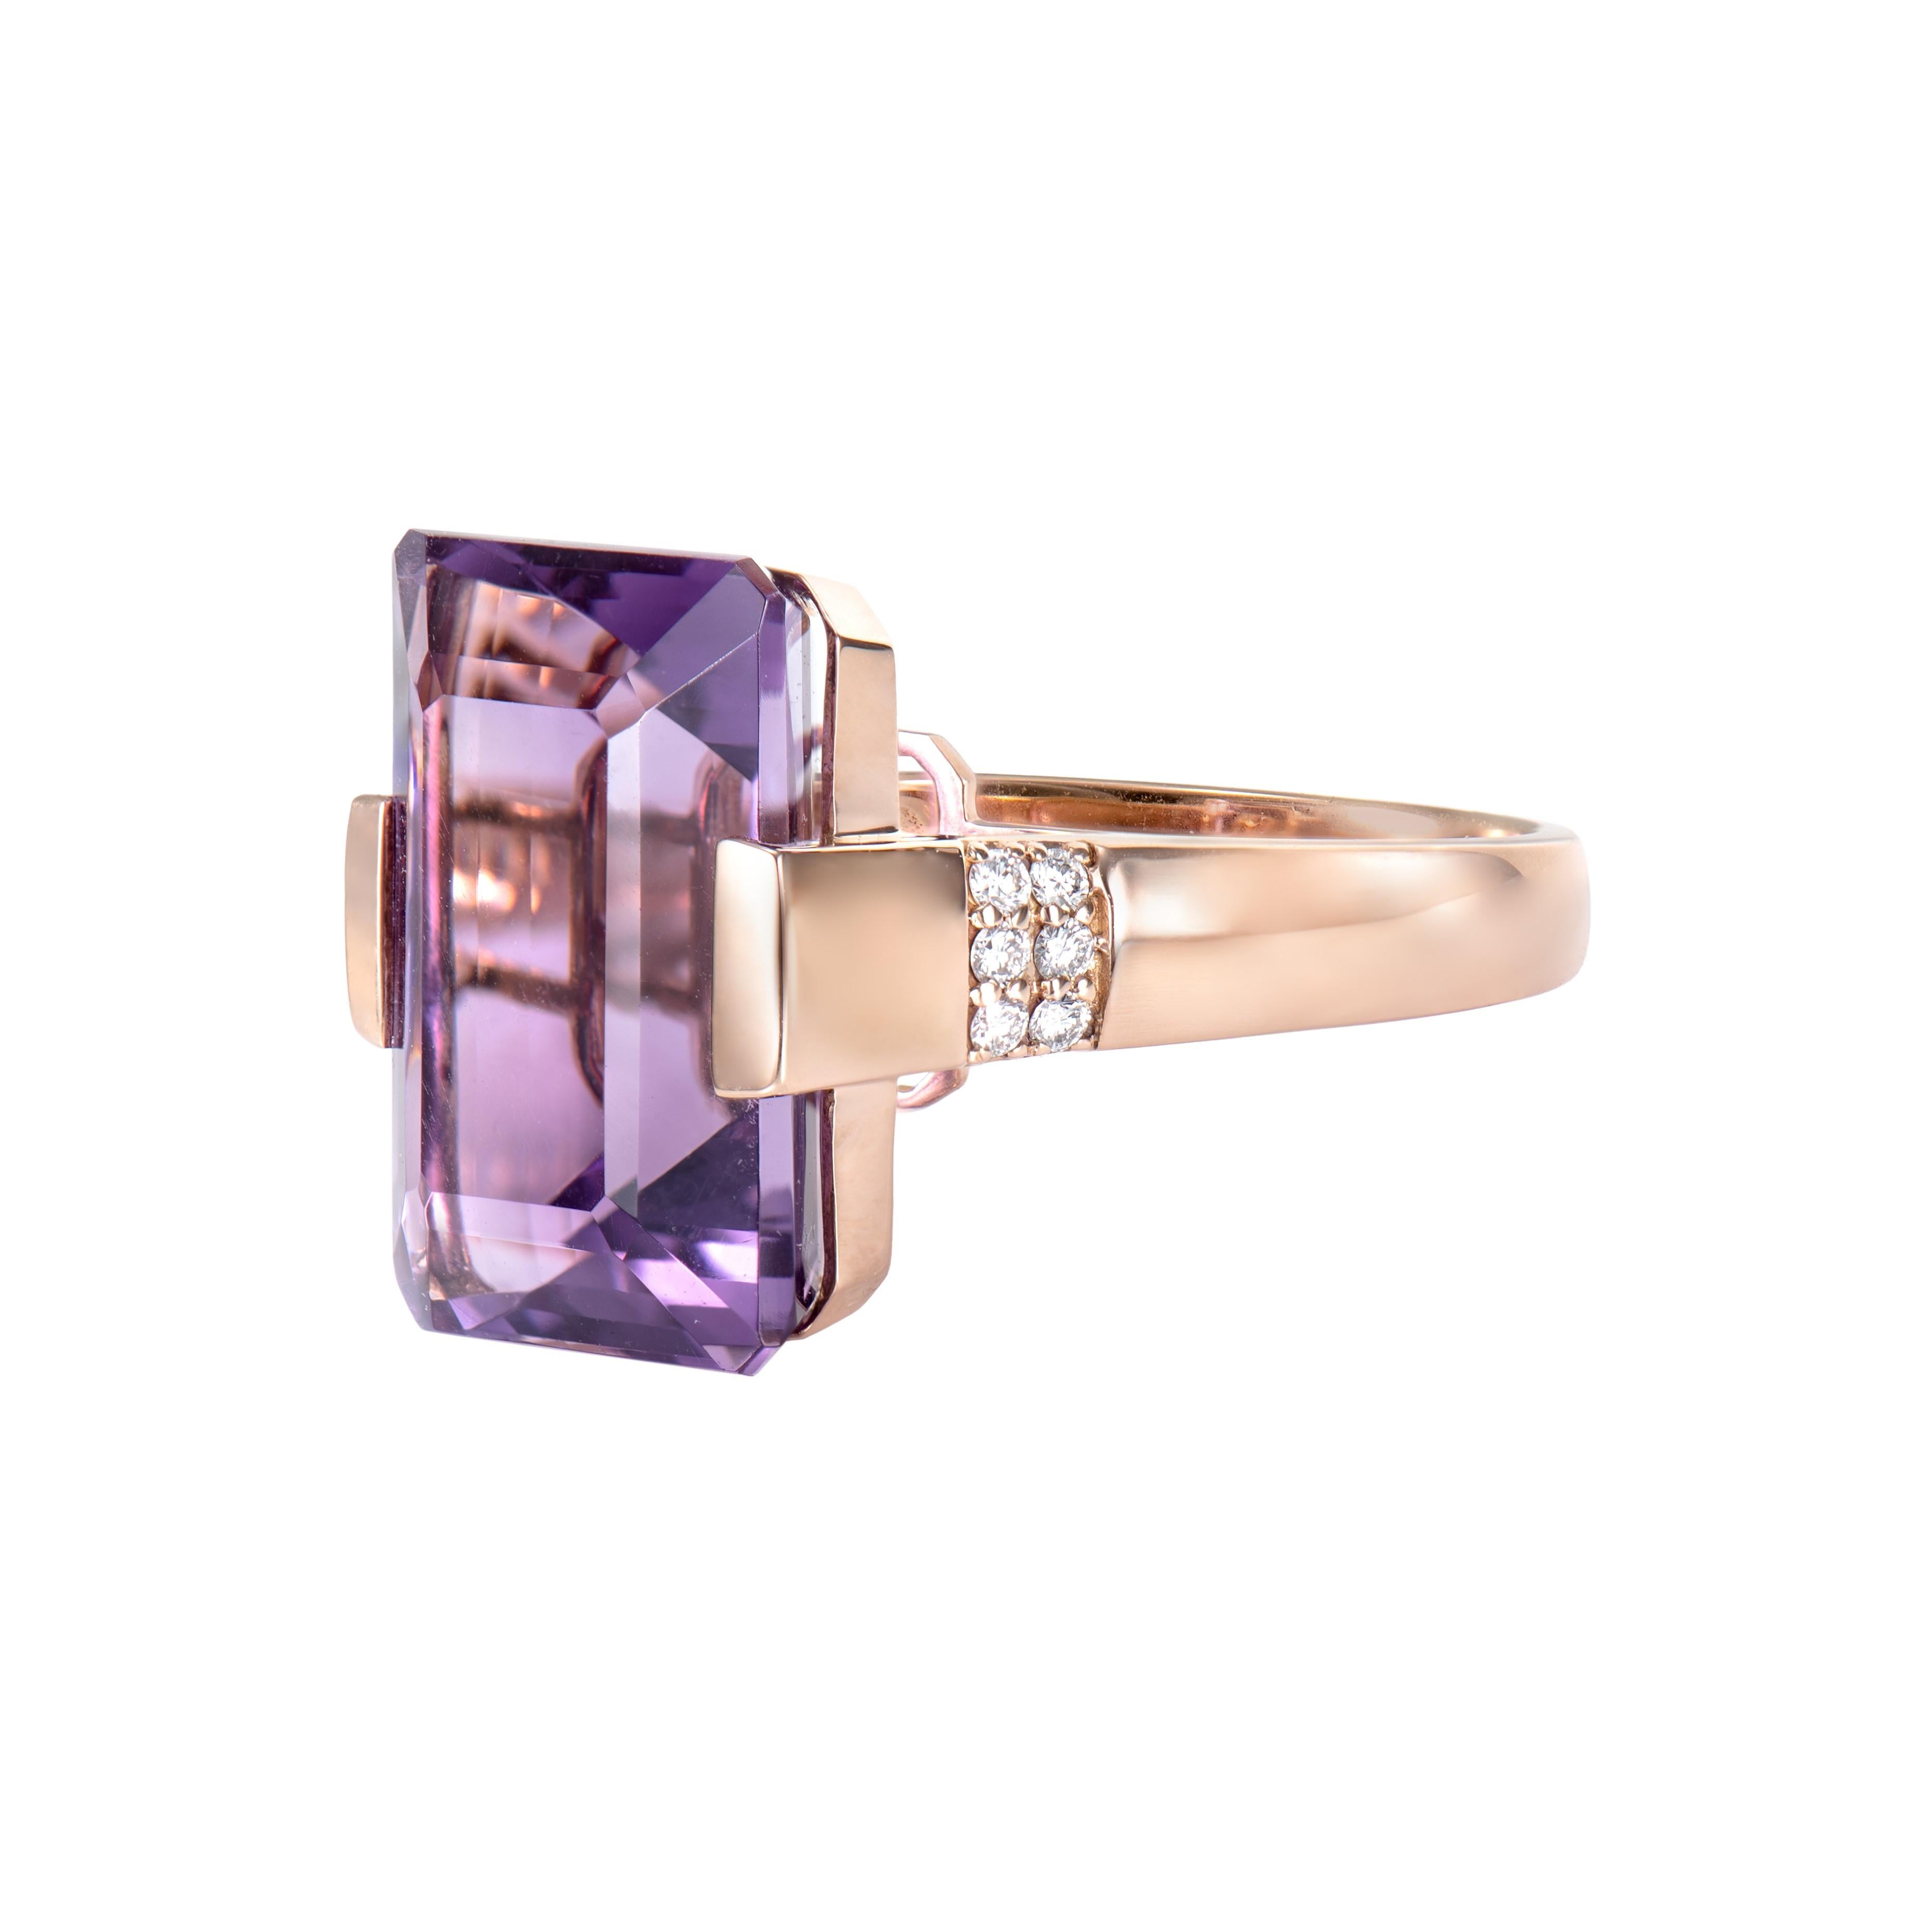 Octagon Cut 15.43 Carat Amethyst Fancy Ring in 18Karat Rose Gold with White Diamond For Sale